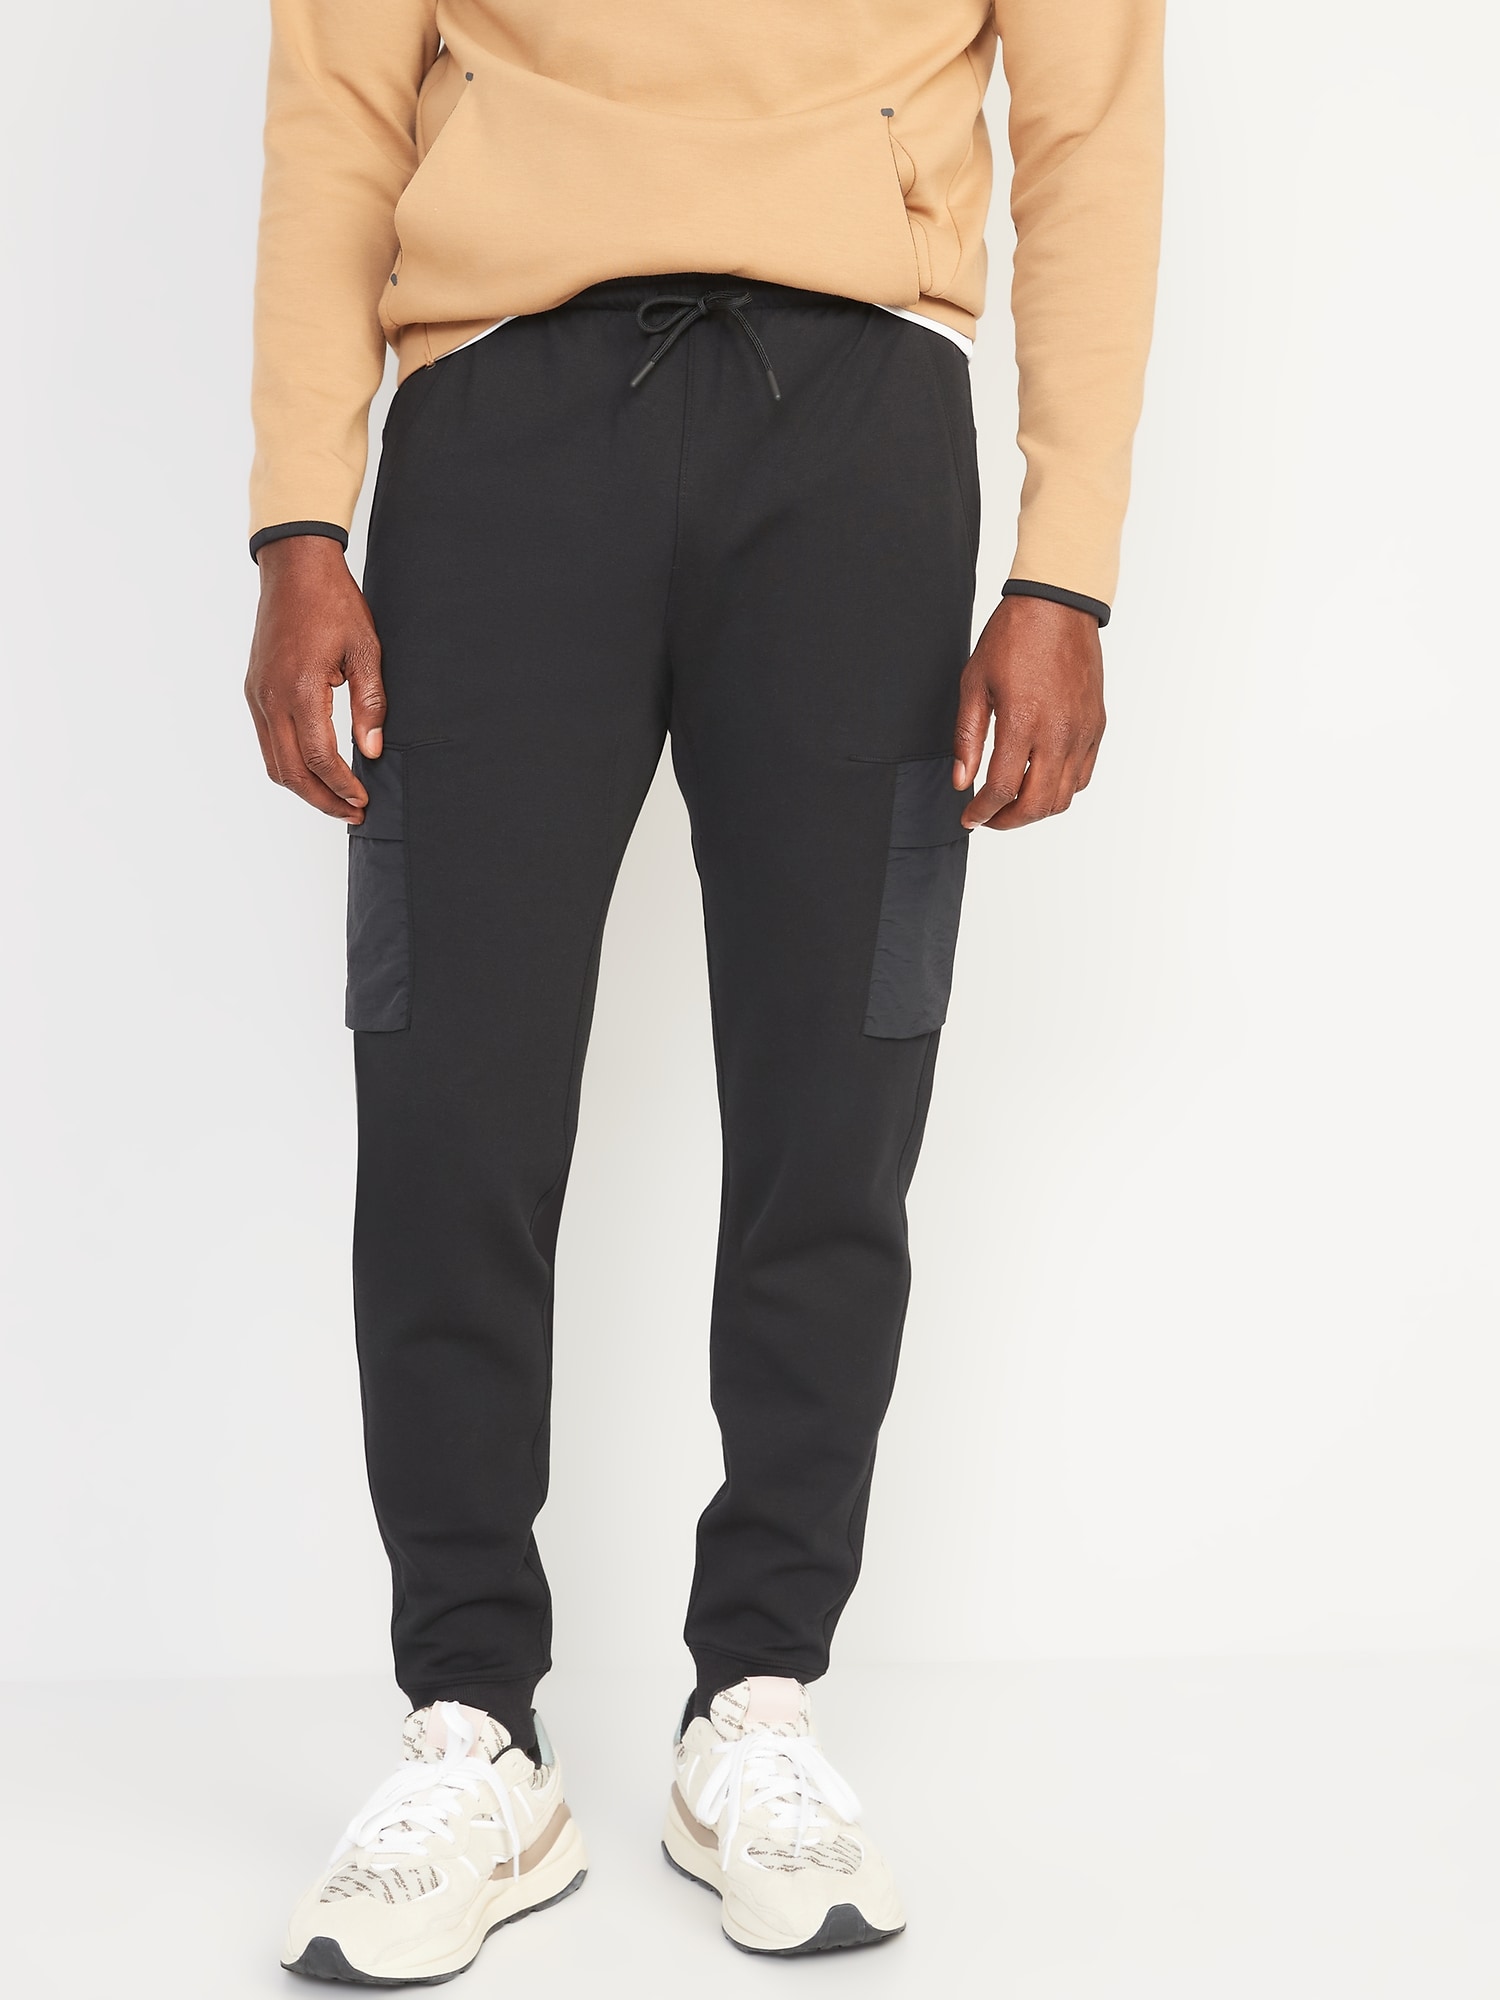 Old Navy Dynamic Fleece Tapered-Fit Sweatpants for Men – Search By Inseam